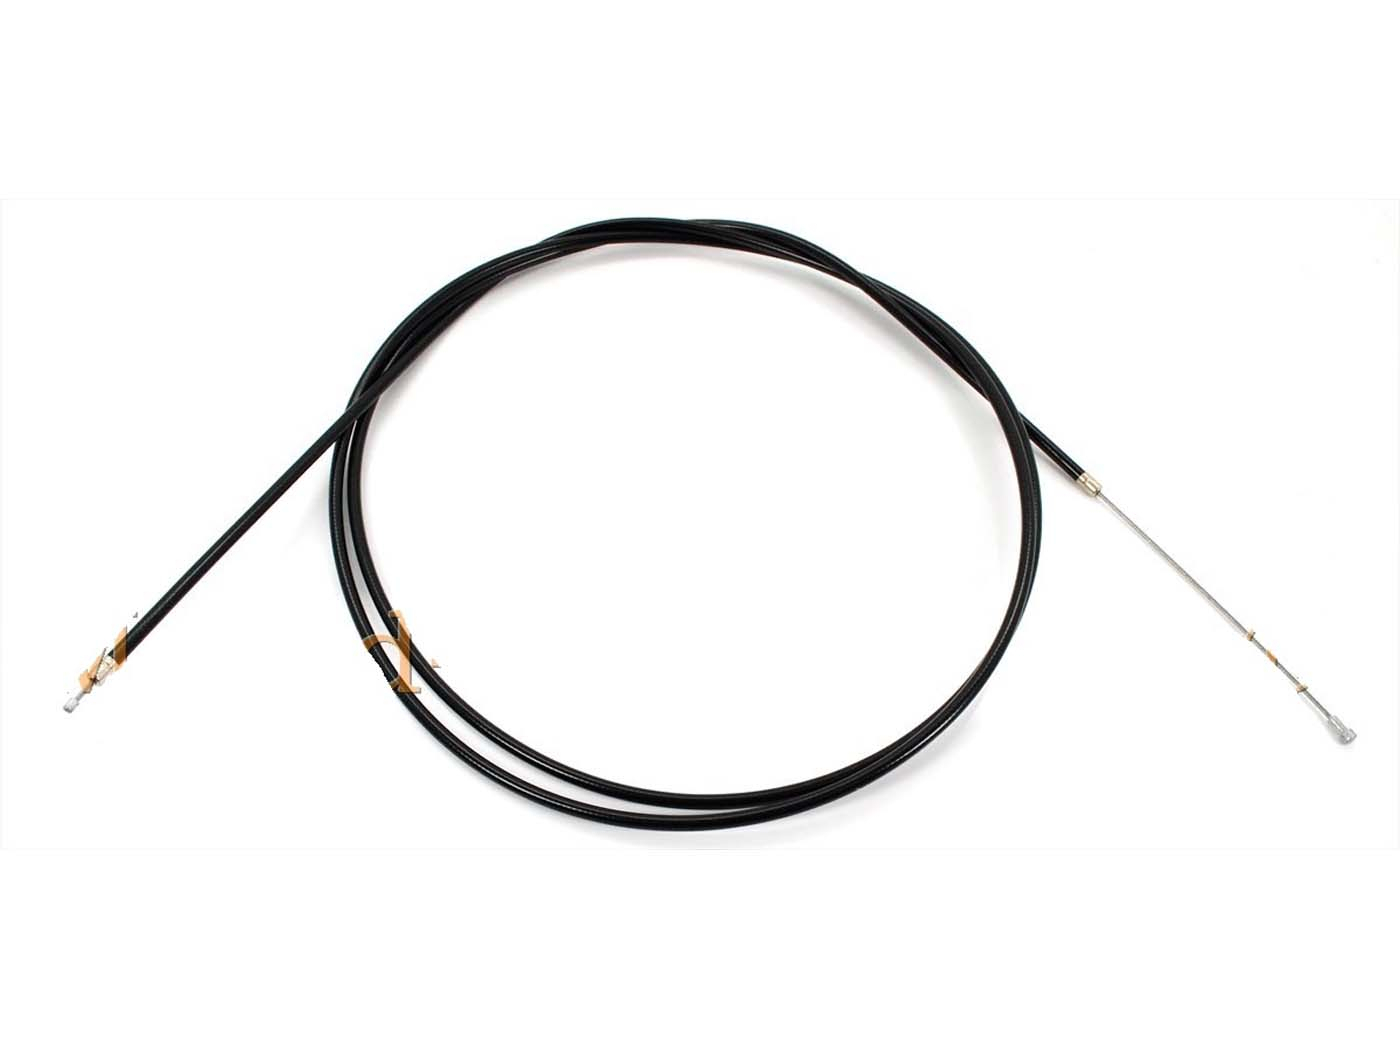 Cable Repair MOGA 1 Piece Length 2 Meters Cable Diameter 2mm Throttle Cable Nipple 3mm 4mm Brake Cable Clutch Cable 3,5/5mm 10mm For Zündapp, Kreidler, Hercules, Puch, Miele, DKW, NSU